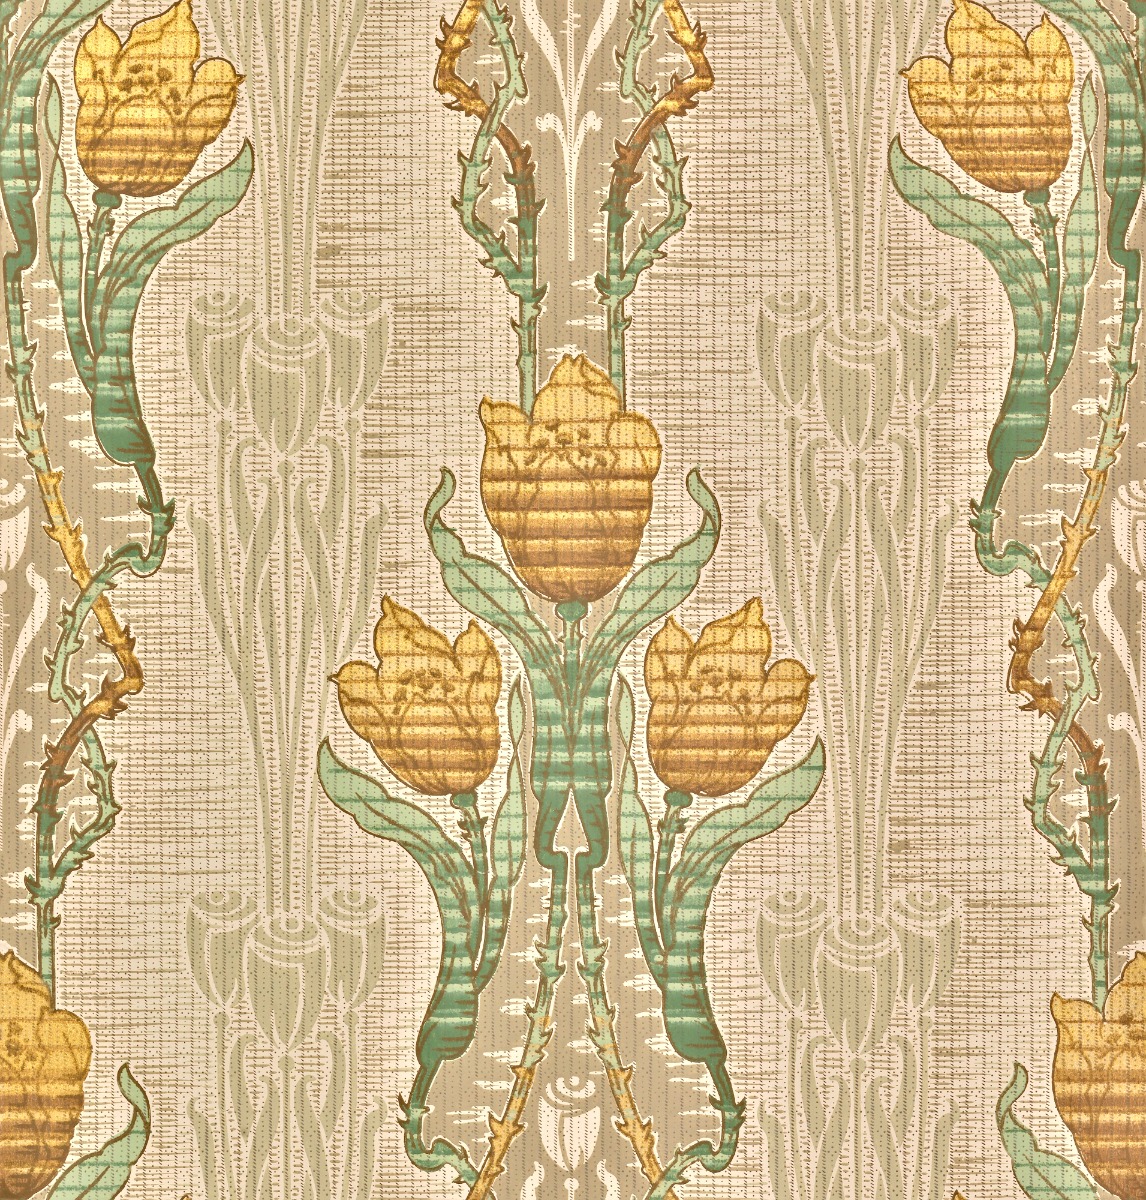 A seamless wallpaper texture with daffodil wallpaper units arranged in a None pattern